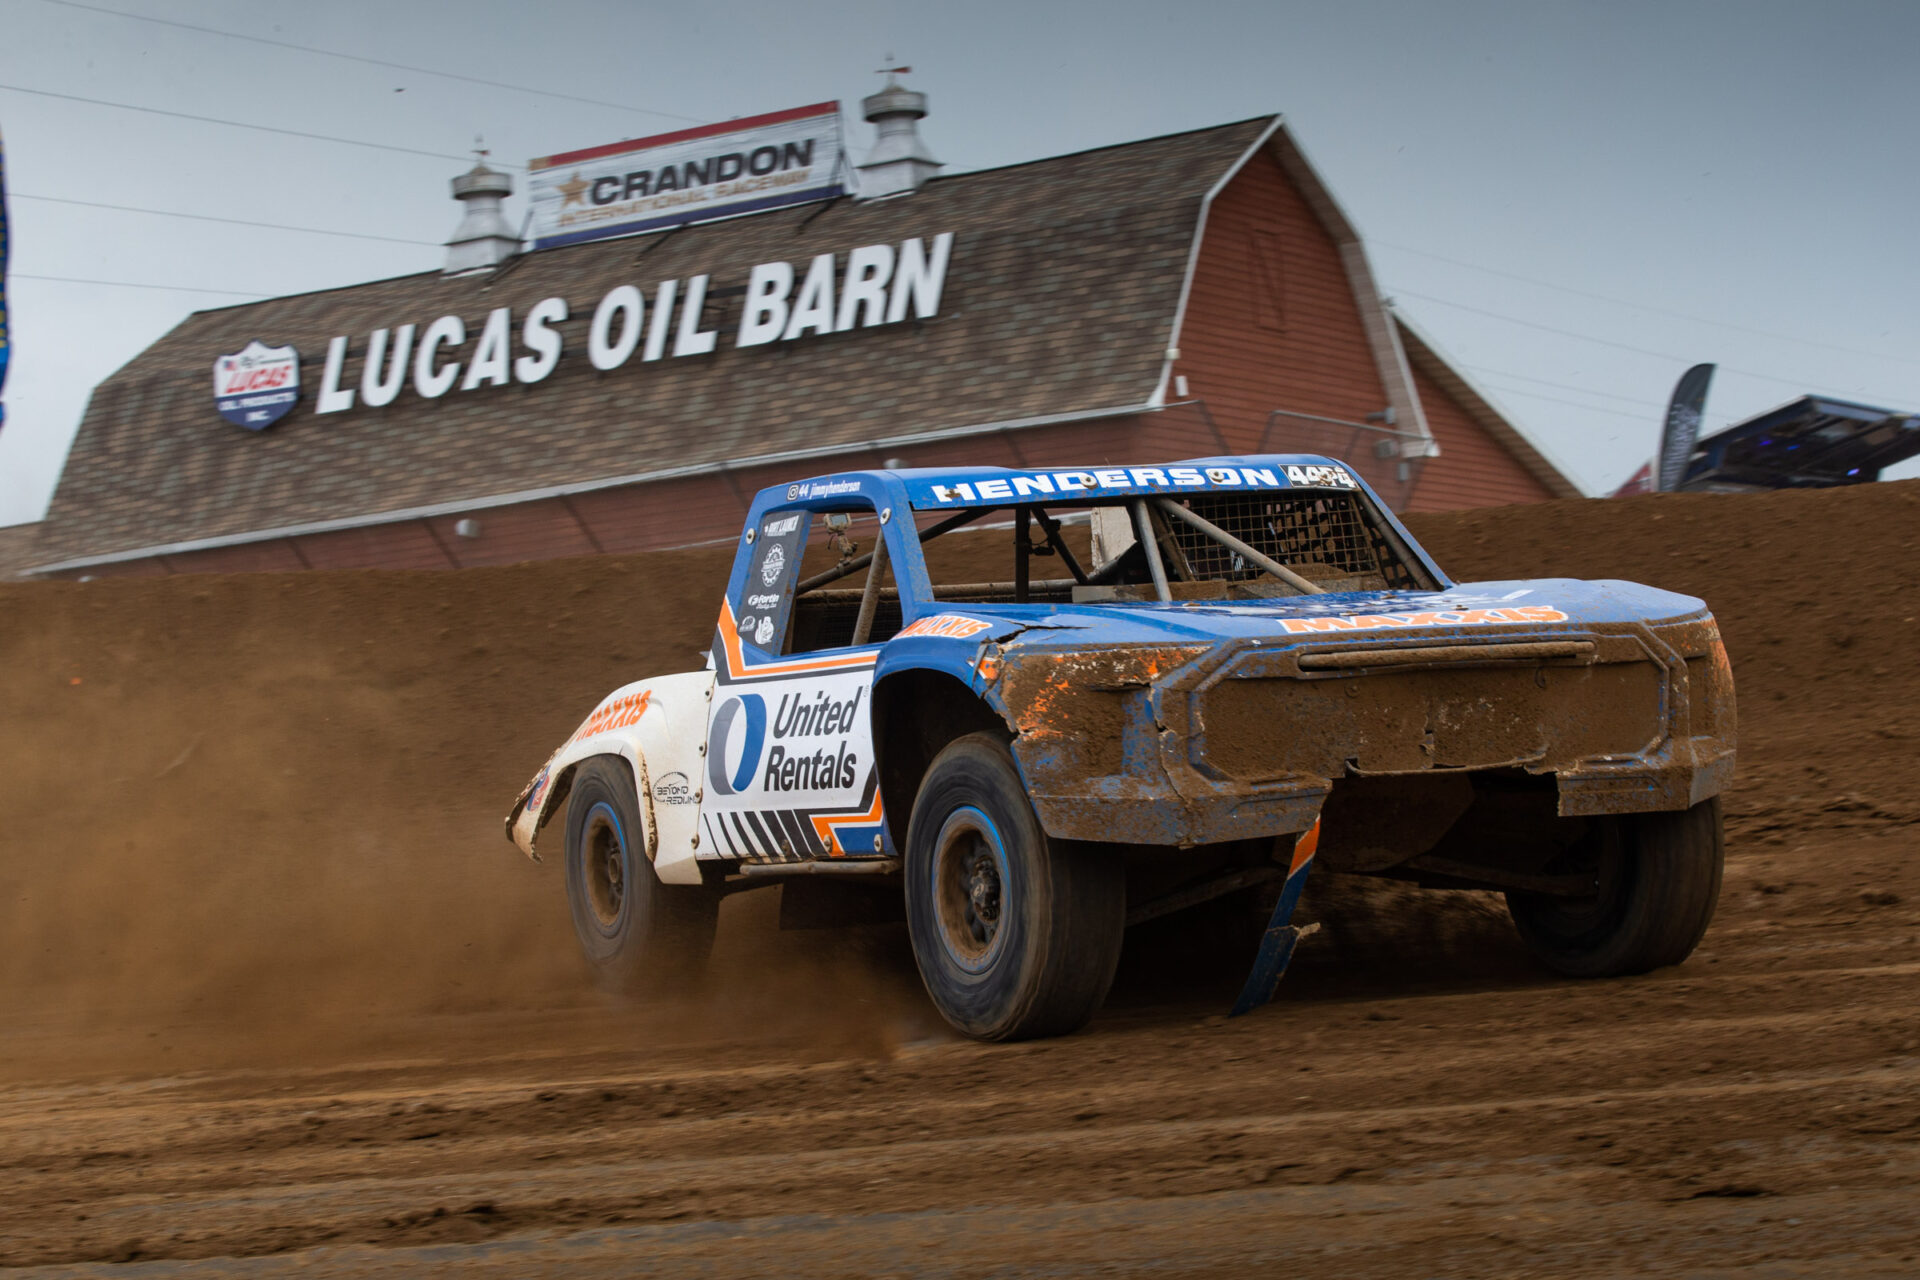 Jimmy Henderson kicking up dust in his truck at the AMSOIL Championship Off-Road Rounds 3 and 4, held June 24-25 in Crandon, Wisconsin.